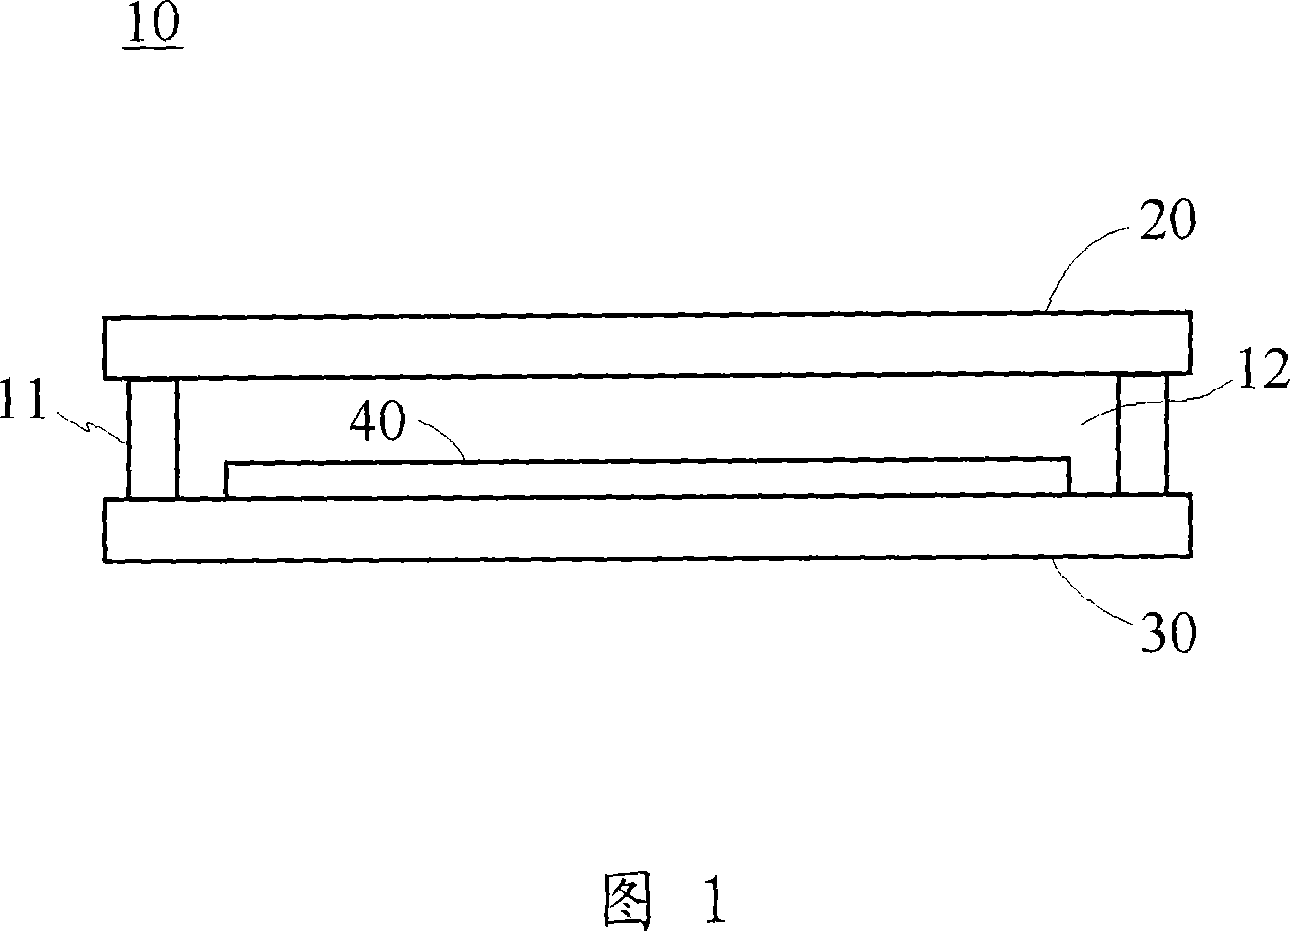 Liquid crystal display and support structure